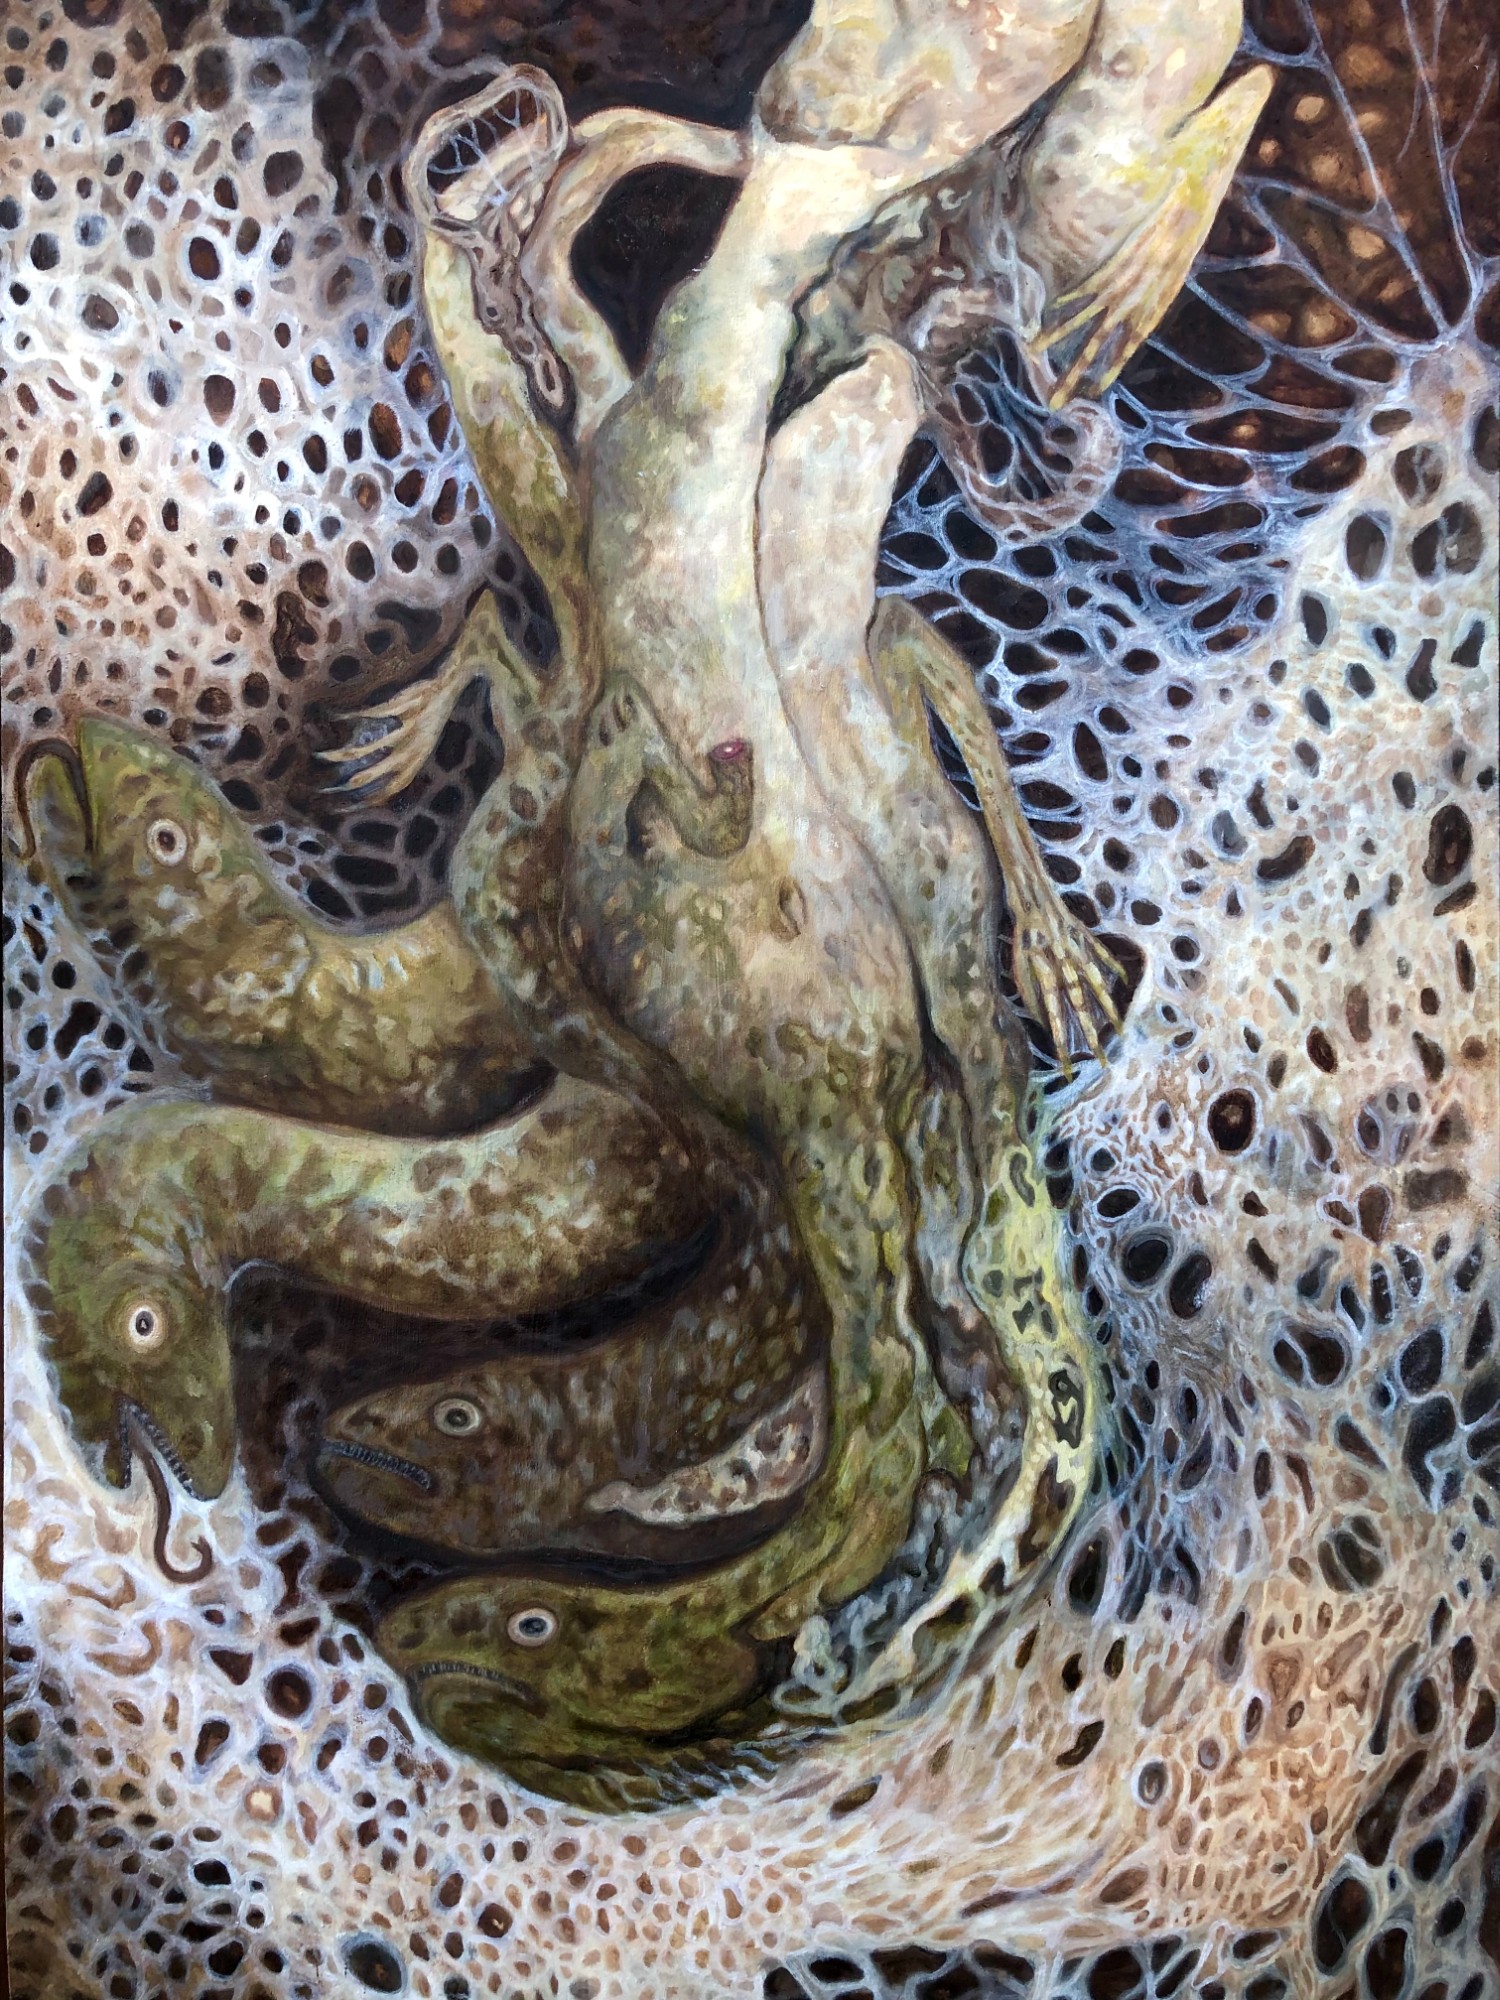 Eel-like creatures for a bestiary of creatures, personal work. Acrylic and oils.